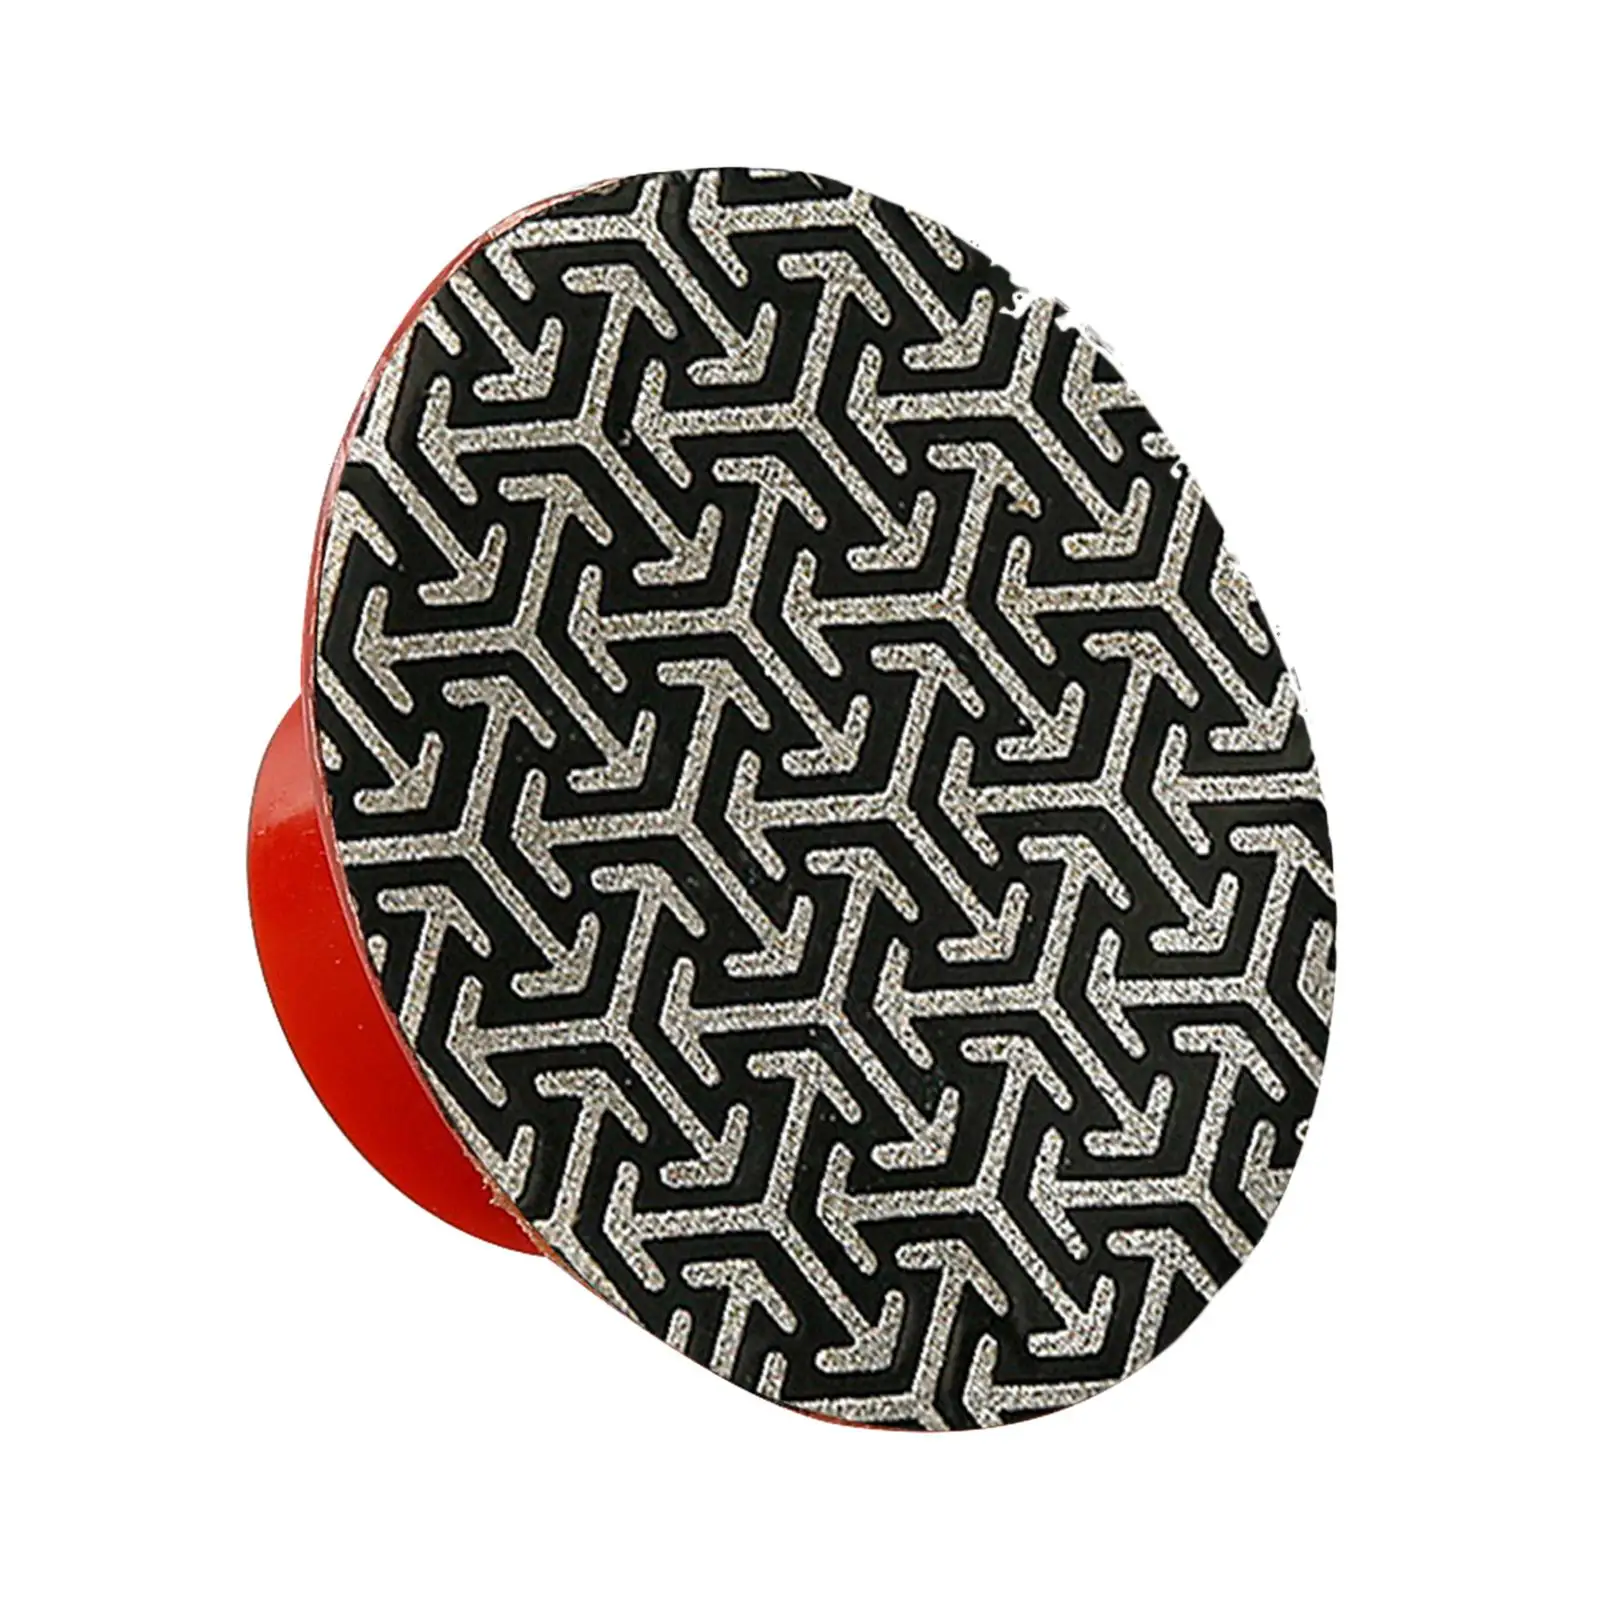 5cm Angle Grinder Grinding Wheel Disc Attachment Polishing Pad M10 Thread Hole for Granite Marble Ceramic Tile Wear Resistant